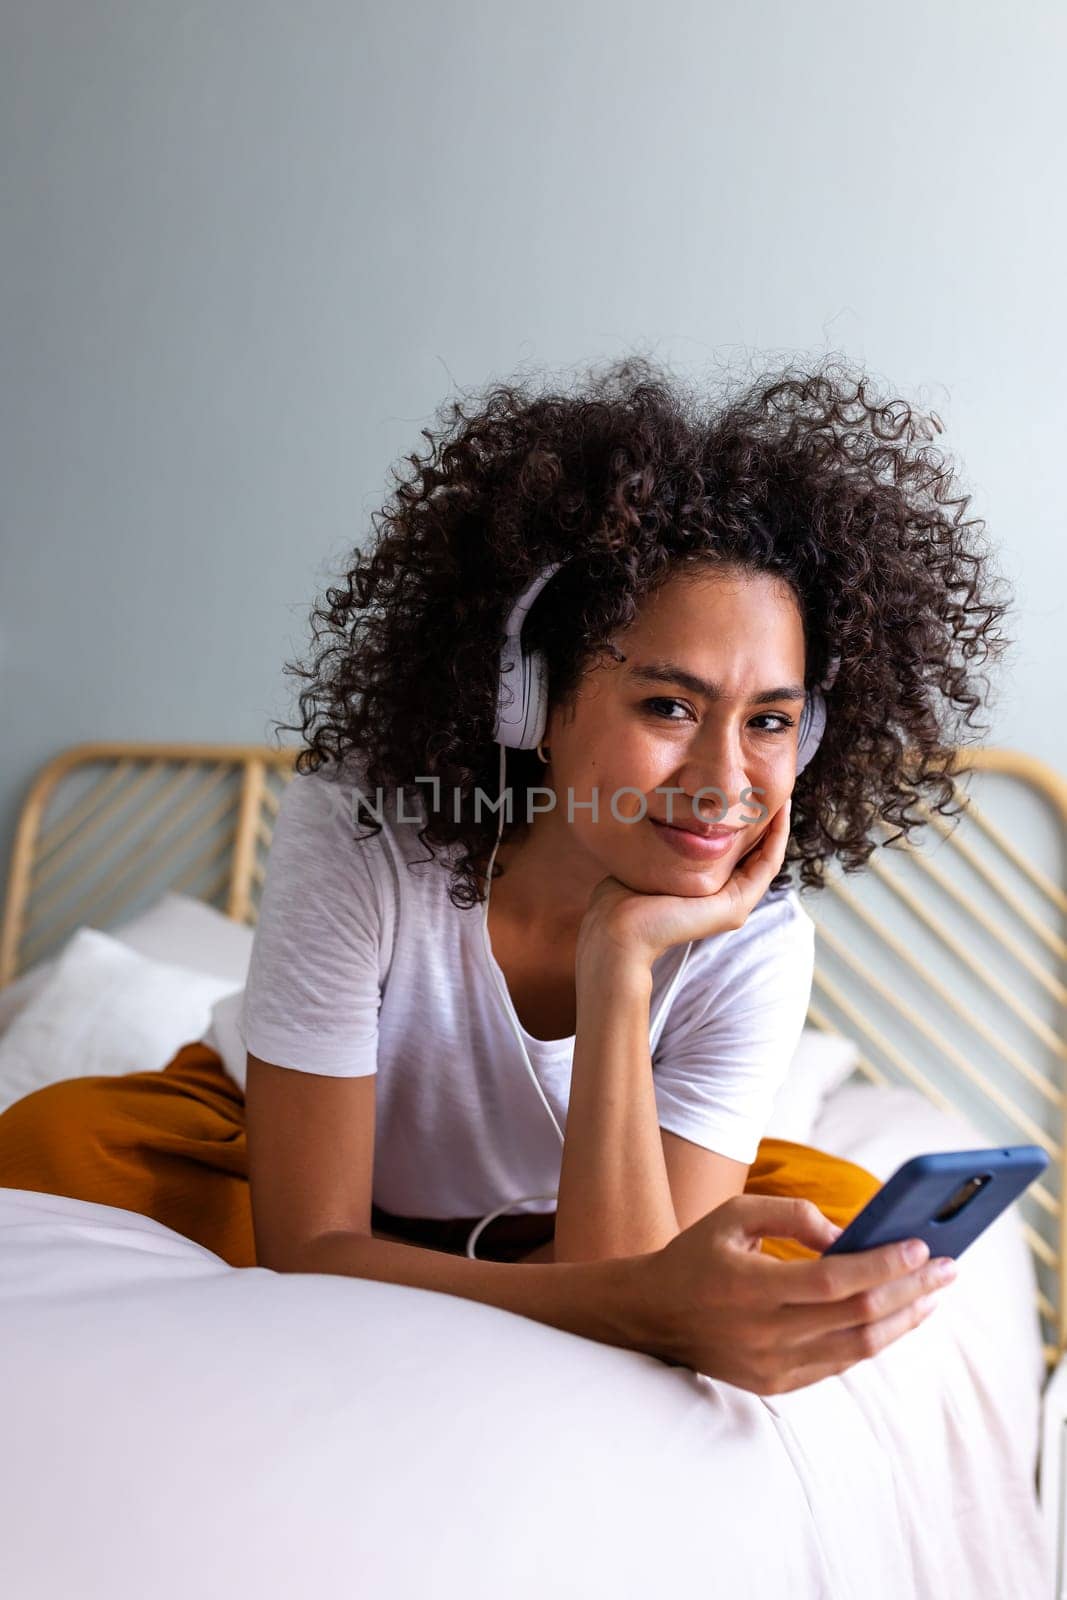 Happy young African American woman listening to music with headphones app mobile phone app looking at camera. Vertical image. Lifestyle concept.